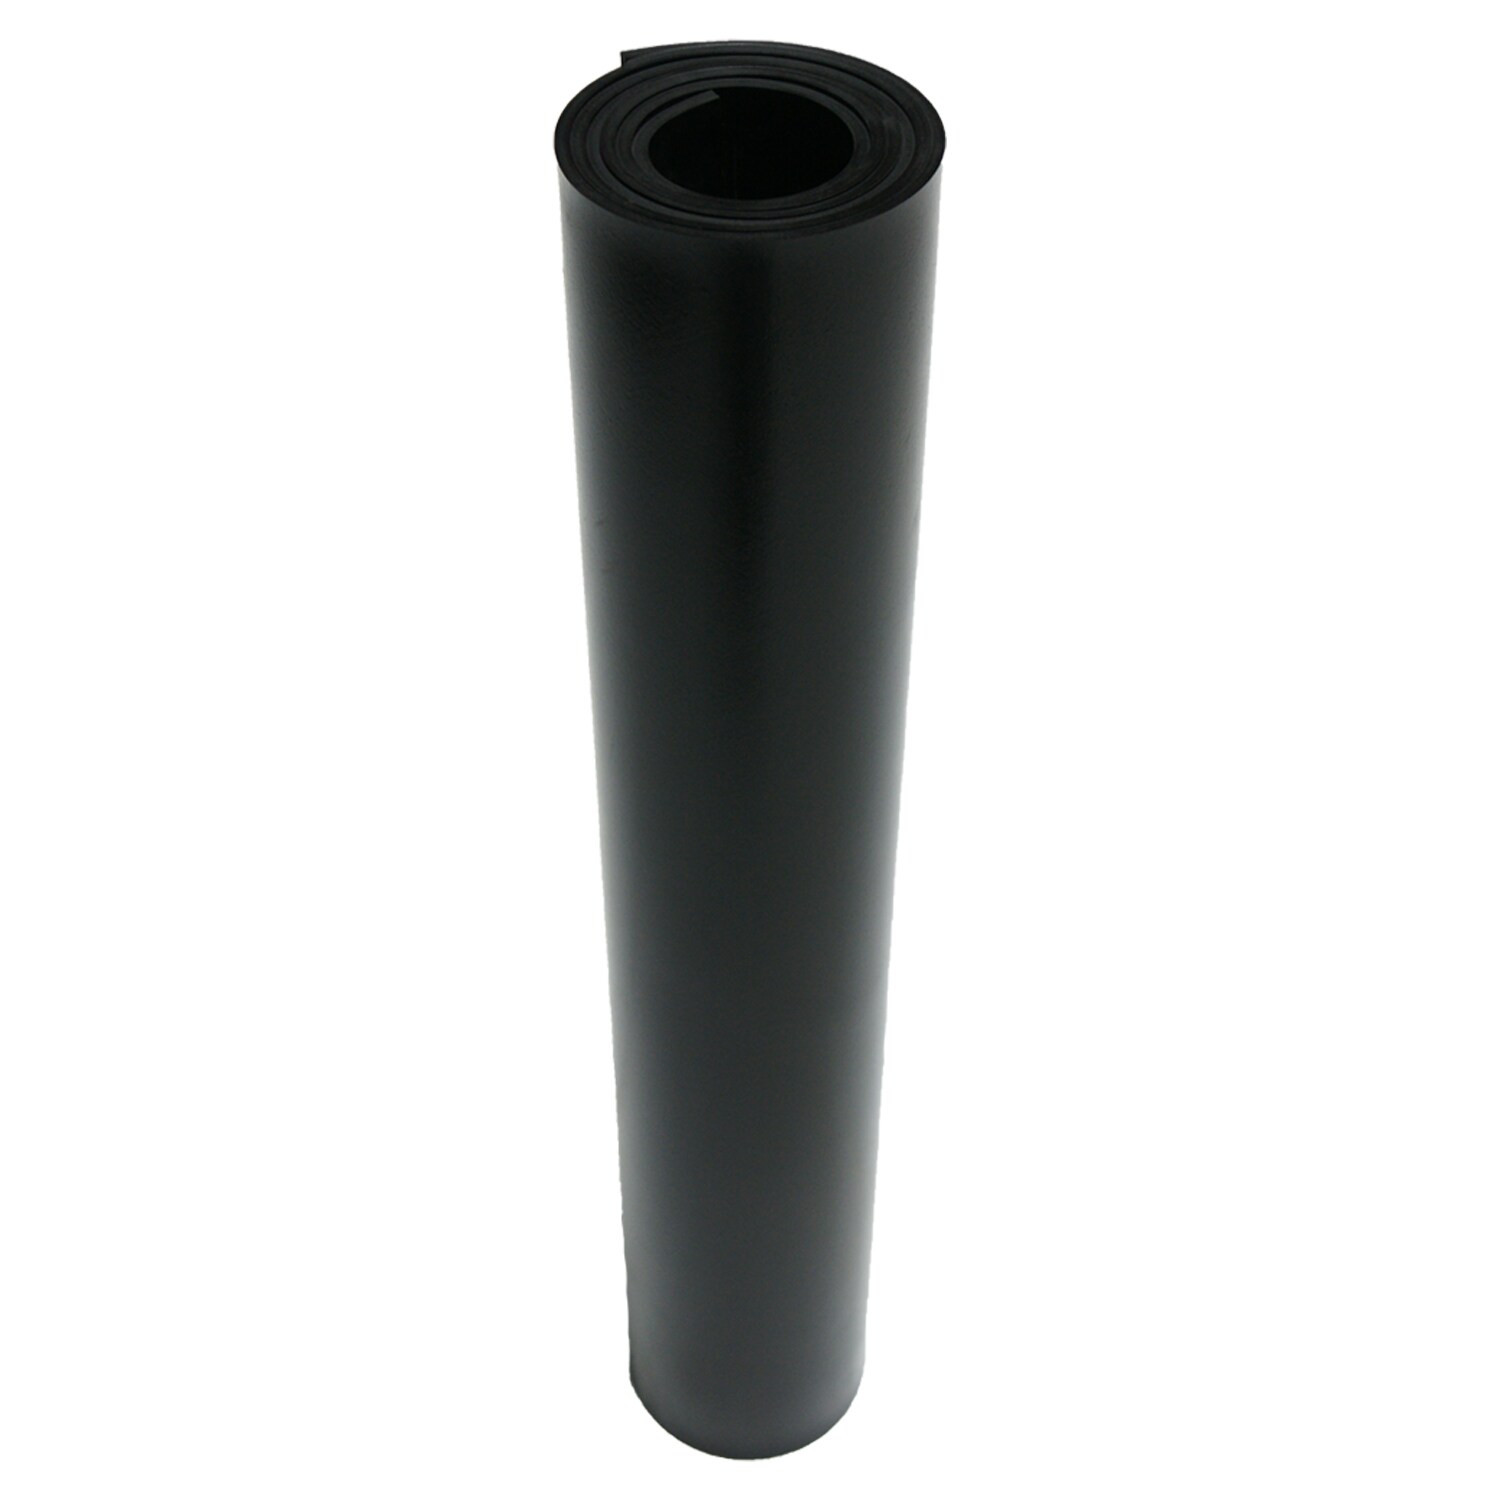 Rubber-Cal - EPDM - Commercial Grade - 60A - Rubber Sheet, 1/4 Thick x 3'  Width x 22' Length, Black